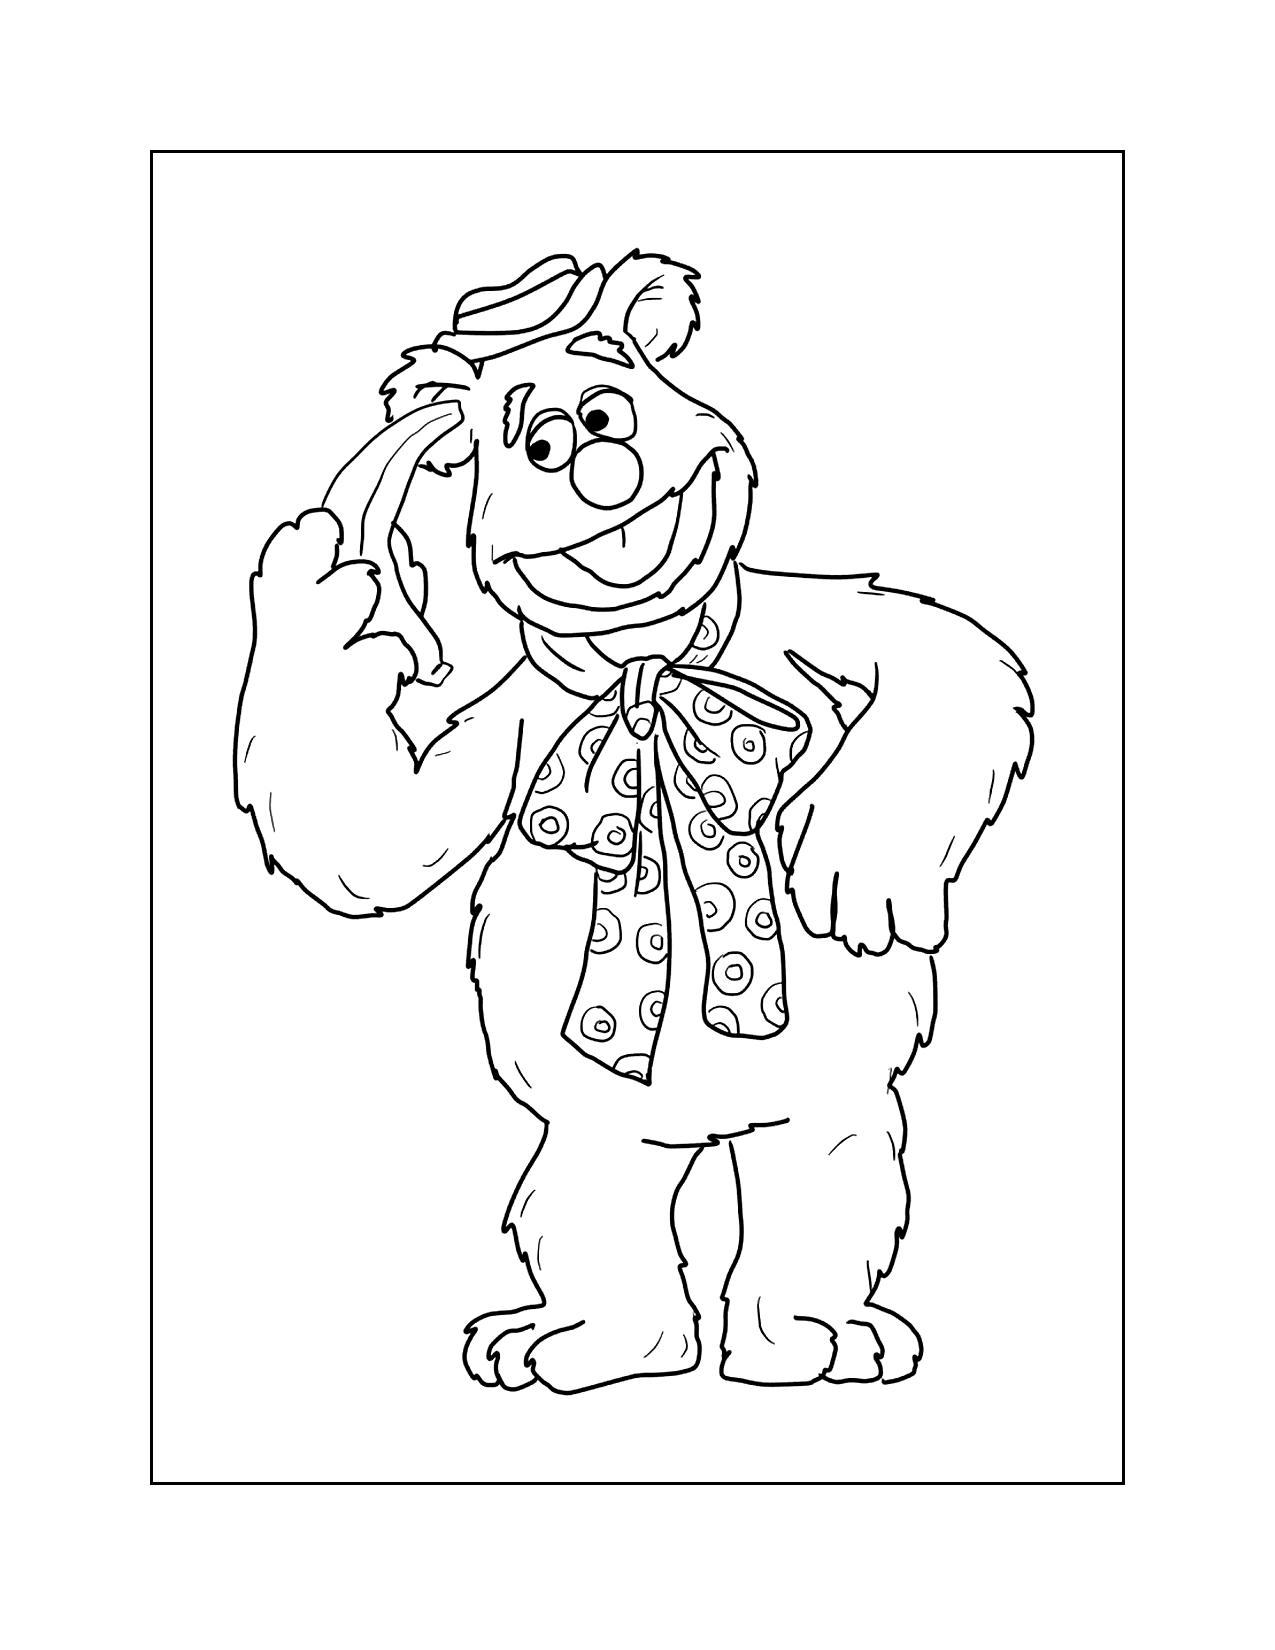 Fozzie Bear Banana Coloring Page